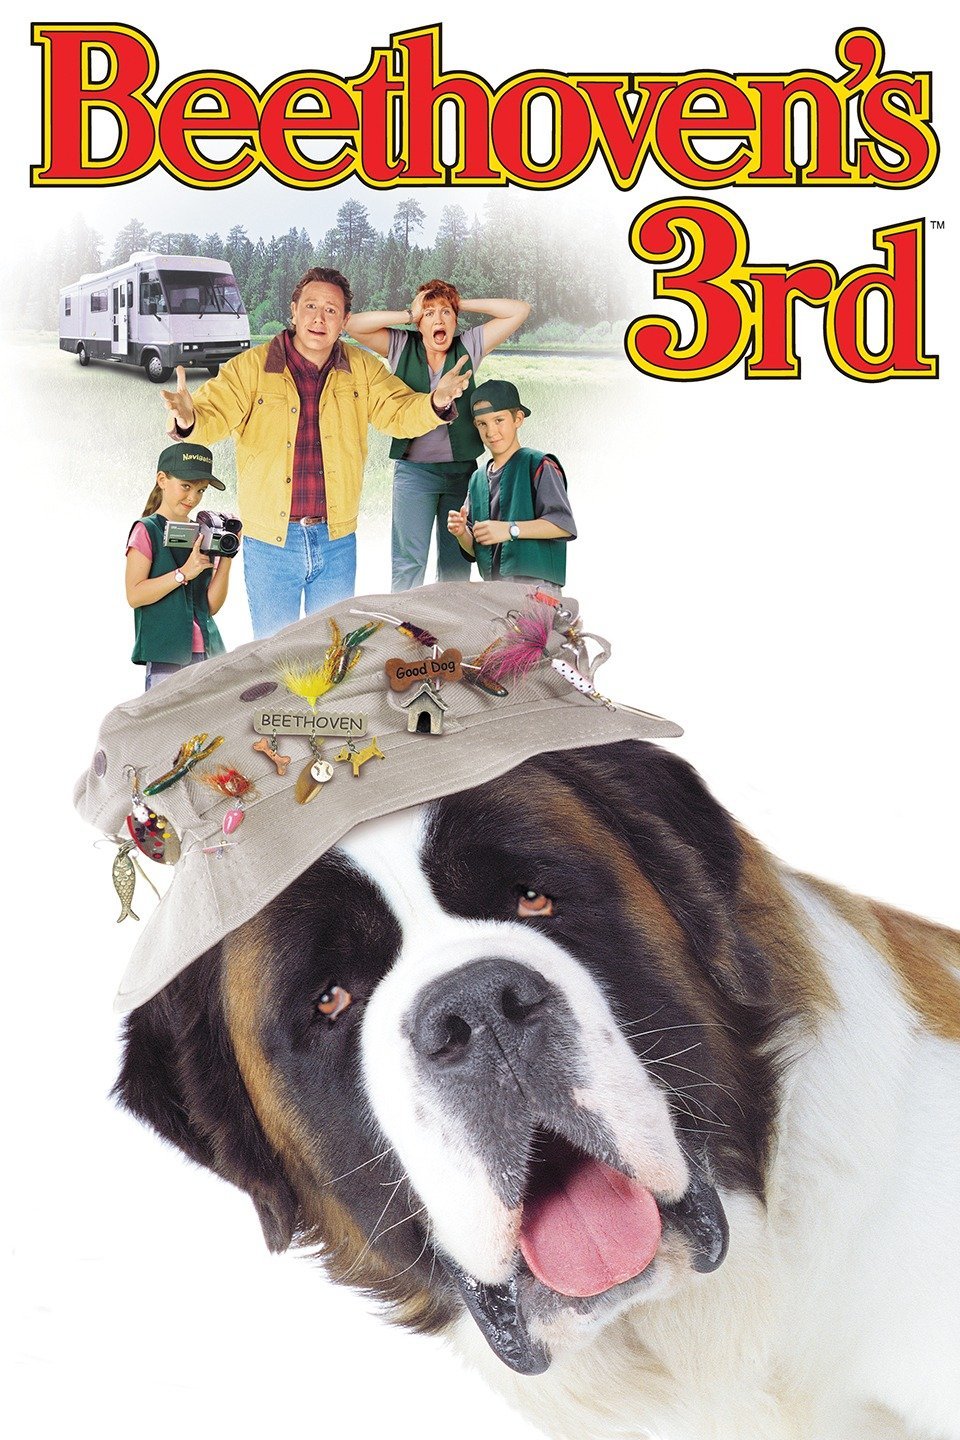 Poster of the movie Beethoven's 3rd